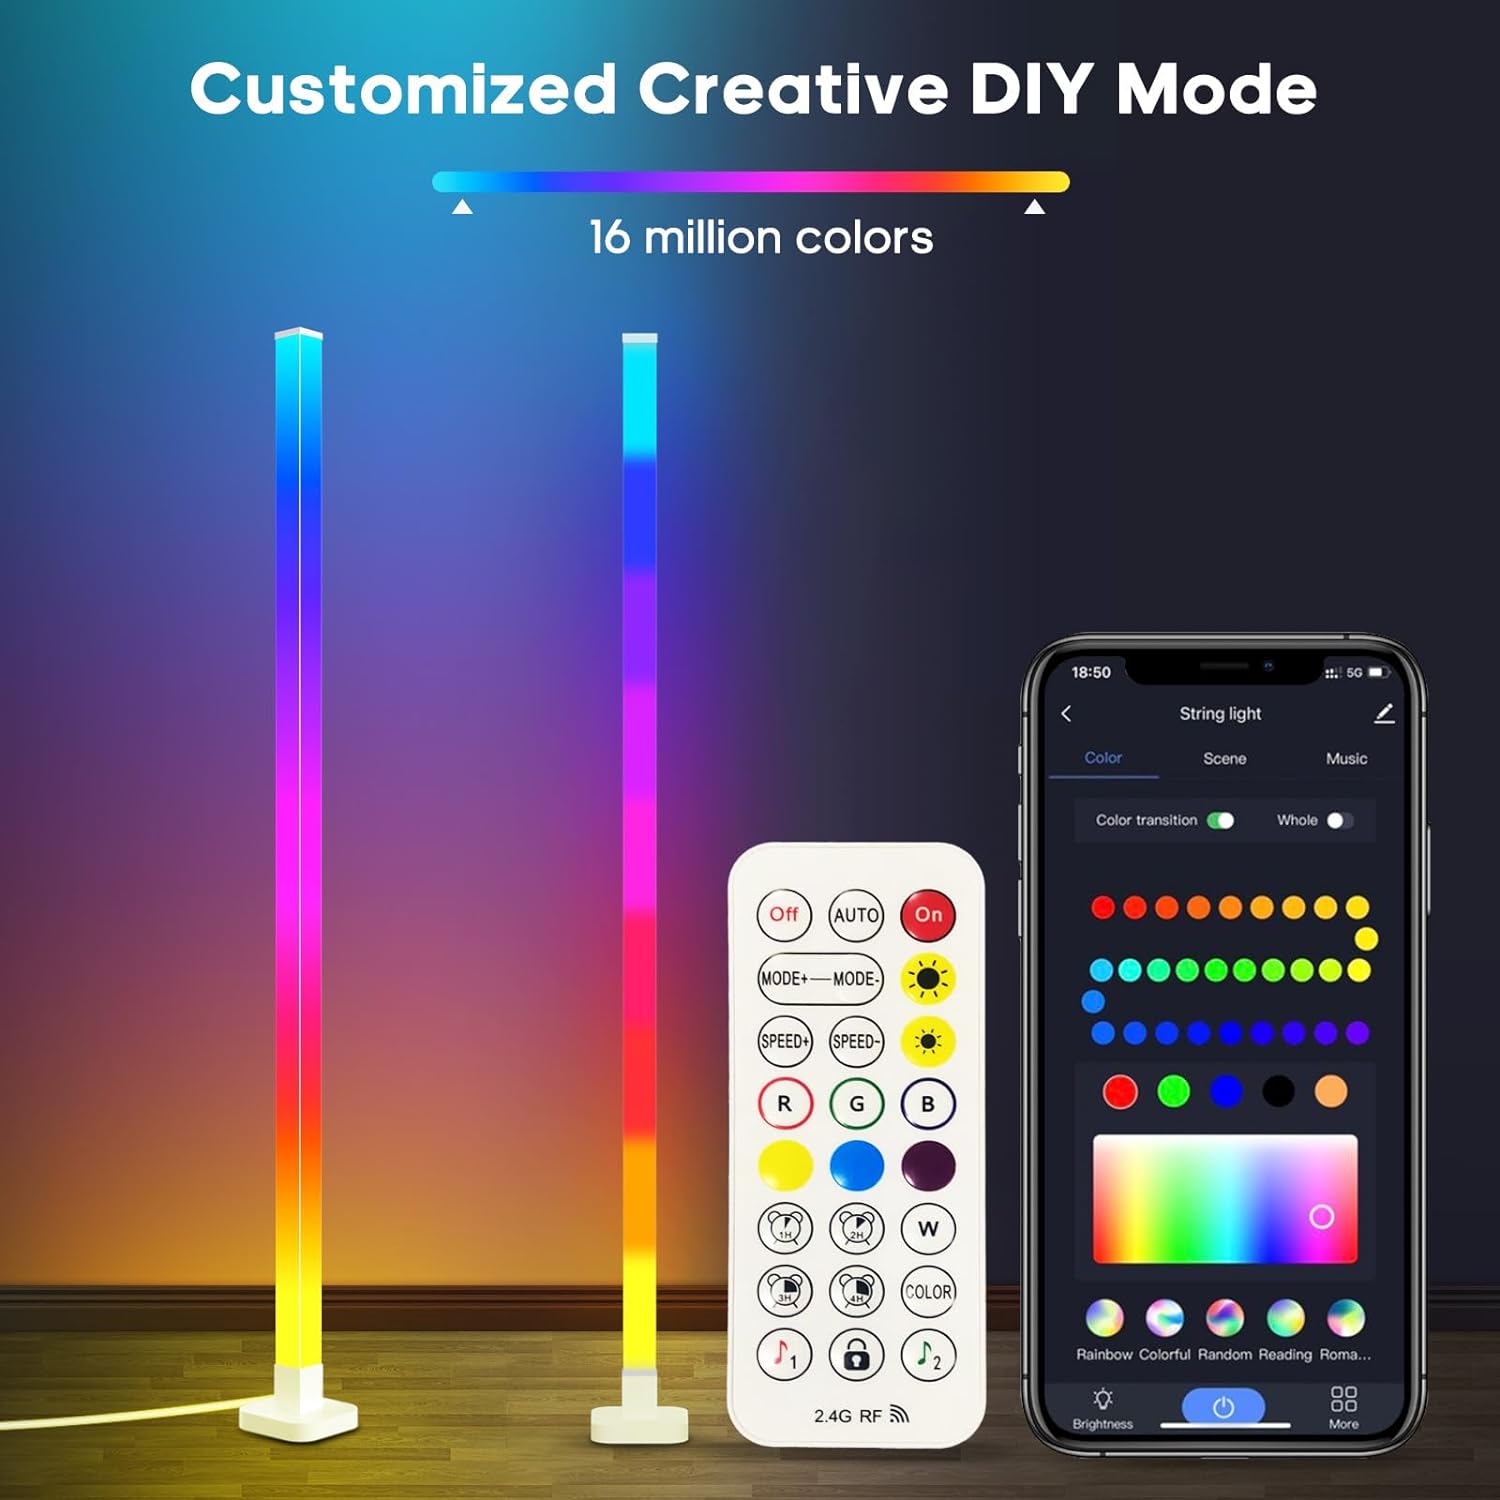 Sympa LED Floor Lamp, Smart RGB Corner Lamp with App and Remote Control